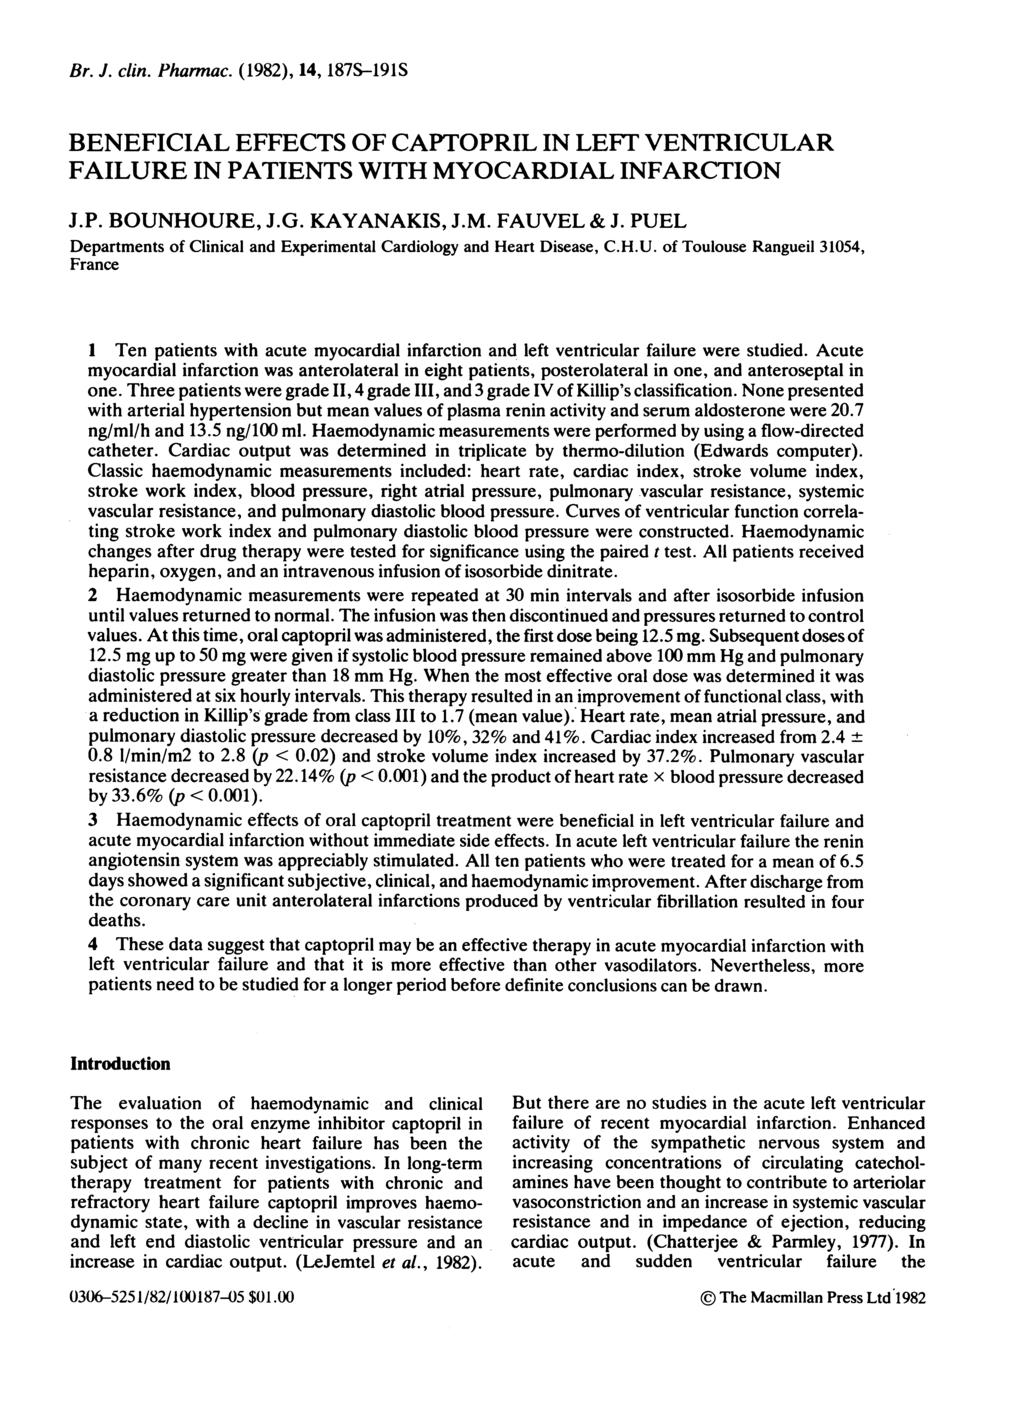 Br. J. clin. Pharmac. (1982), 14, 187S-19lS BENEFICIAL EFFECTS OF CAPTOPRIL IN LEFT VENTRICULAR FAILURE IN PATIENTS WITH MYOCARDIAL INFARCTION J.P. BOUNHOURE, J.G. KAYANAKIS, J.M. FAUVEL & J.